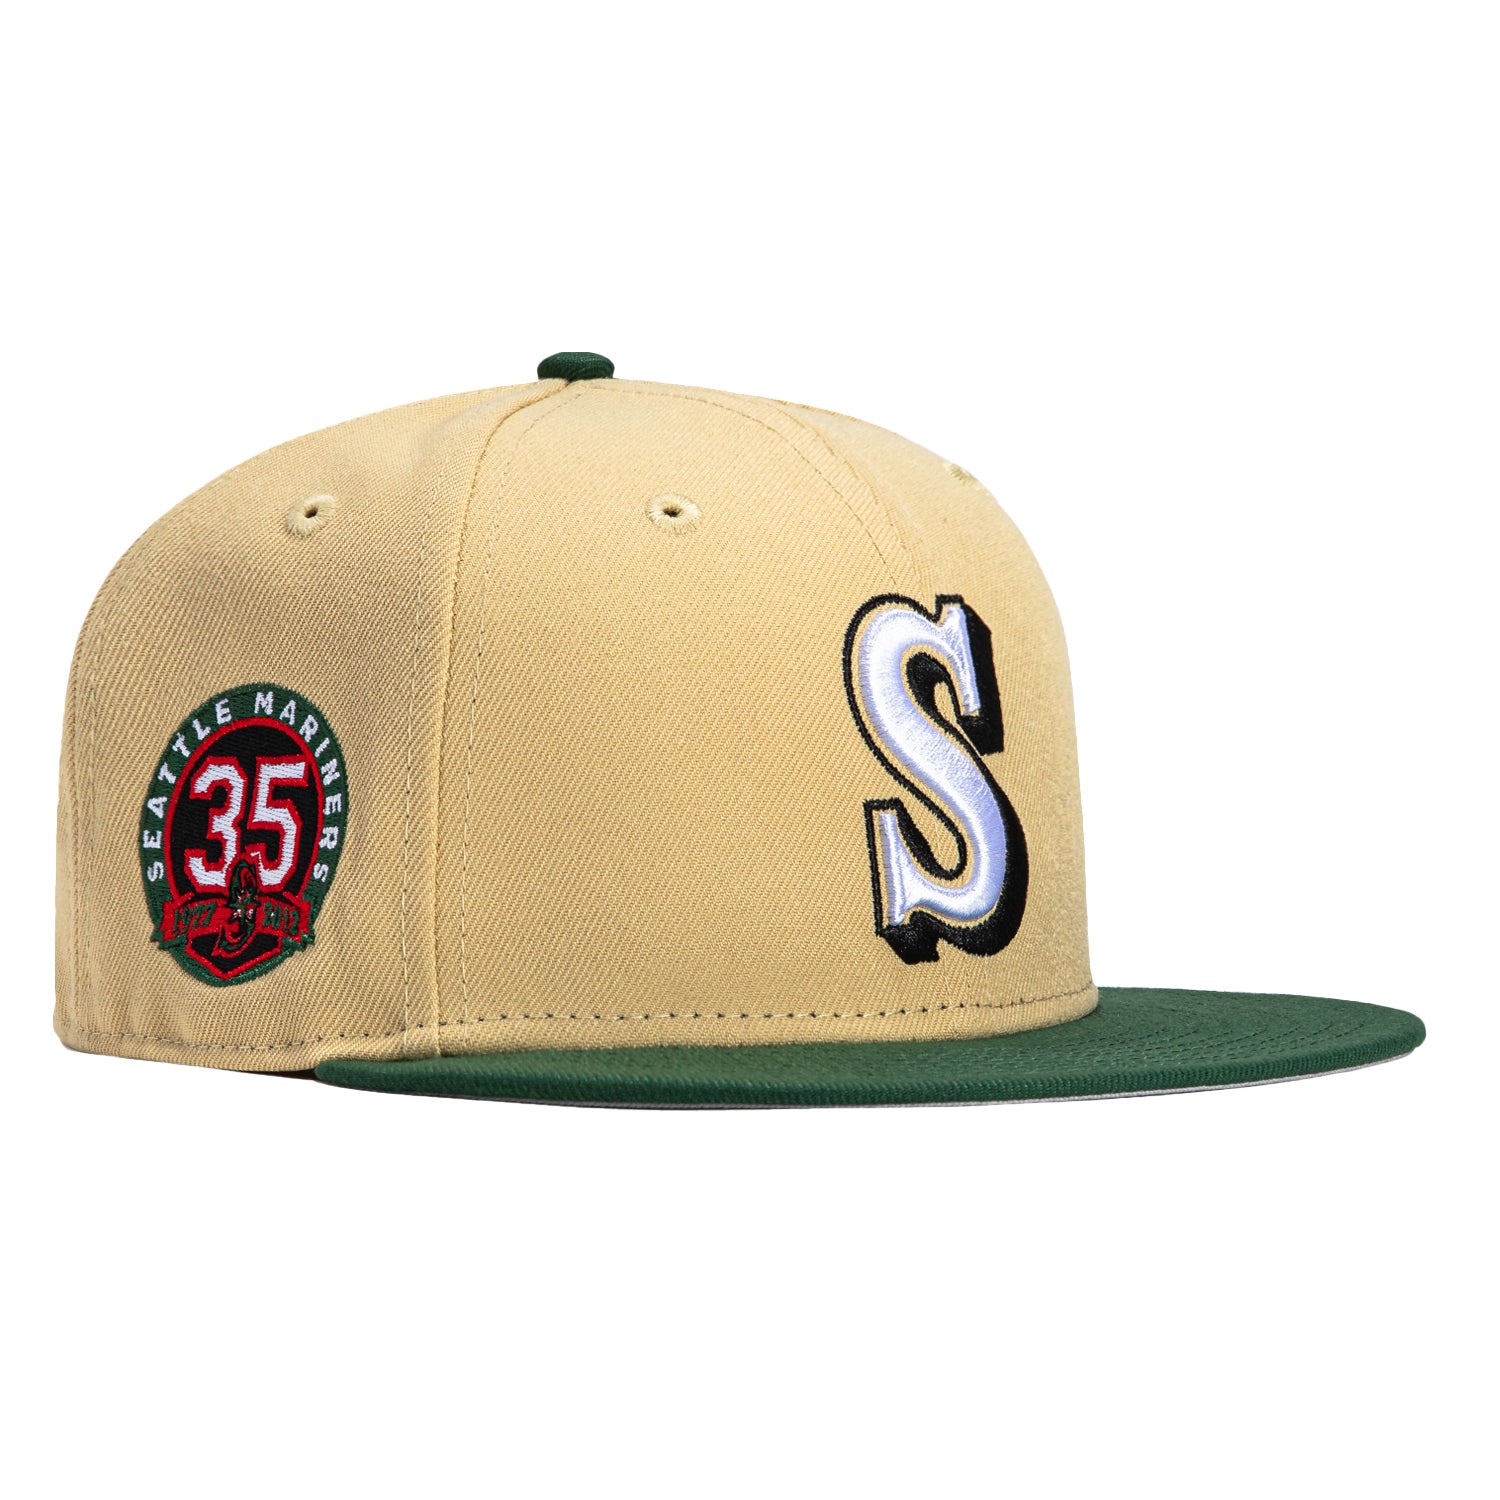 New Era 59FIFTY Seattle Mariners 35th Anniversary Patch Hat - Tan, Green Tan/Green / 7 7/8